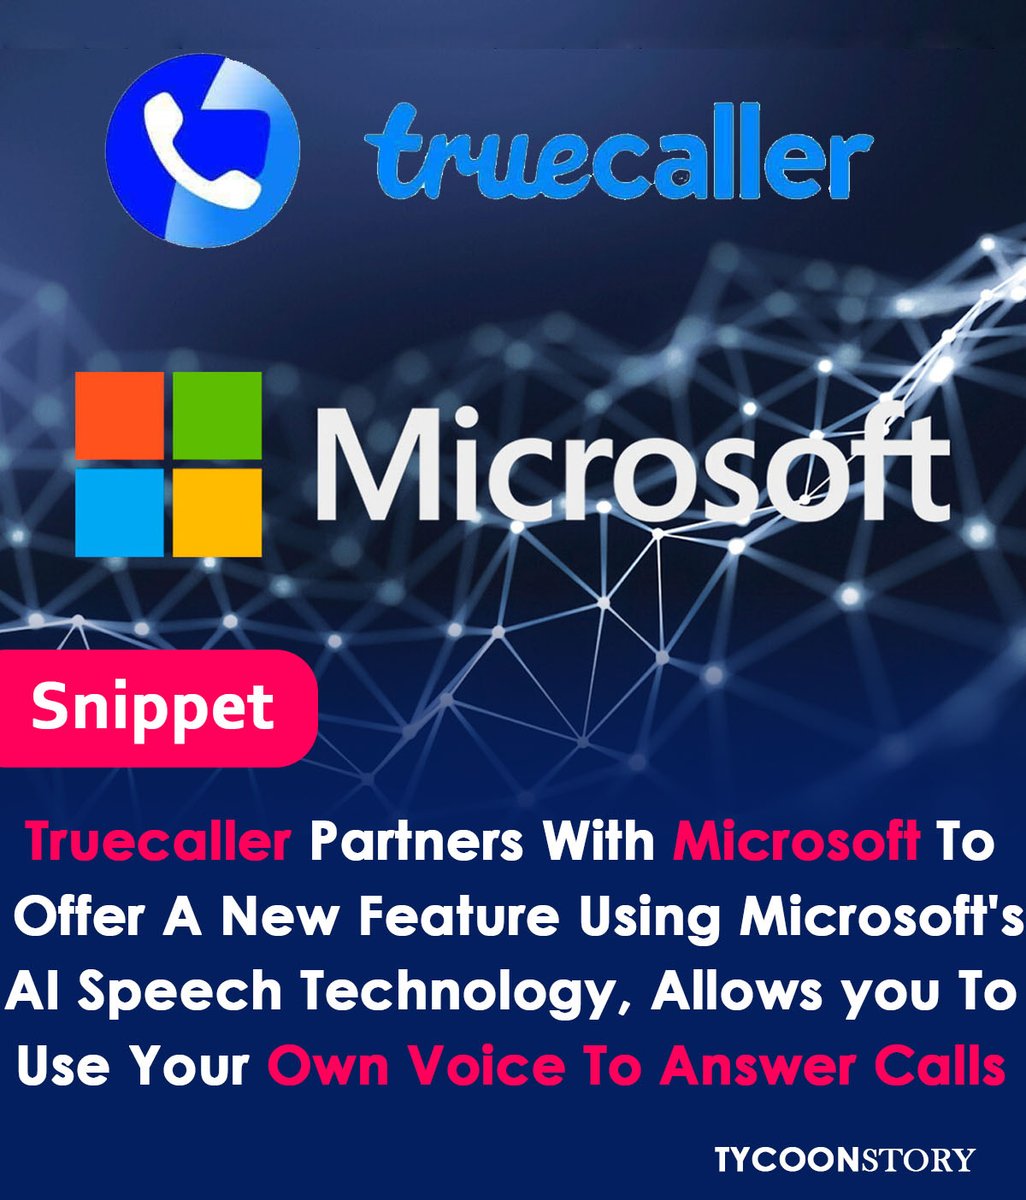 Truecaller Lets You Answer Calls with Your Own Voice: A Personalized Ring with Microsoft's AI #Truecaller #CallExperience #Personalized #Communication #PhoneCall #AIAssistant #MicrosoftAI #AzureAISpeech #PersonalVoice #AIInnovation @Microsoft @Truecaller tycoonstory.com